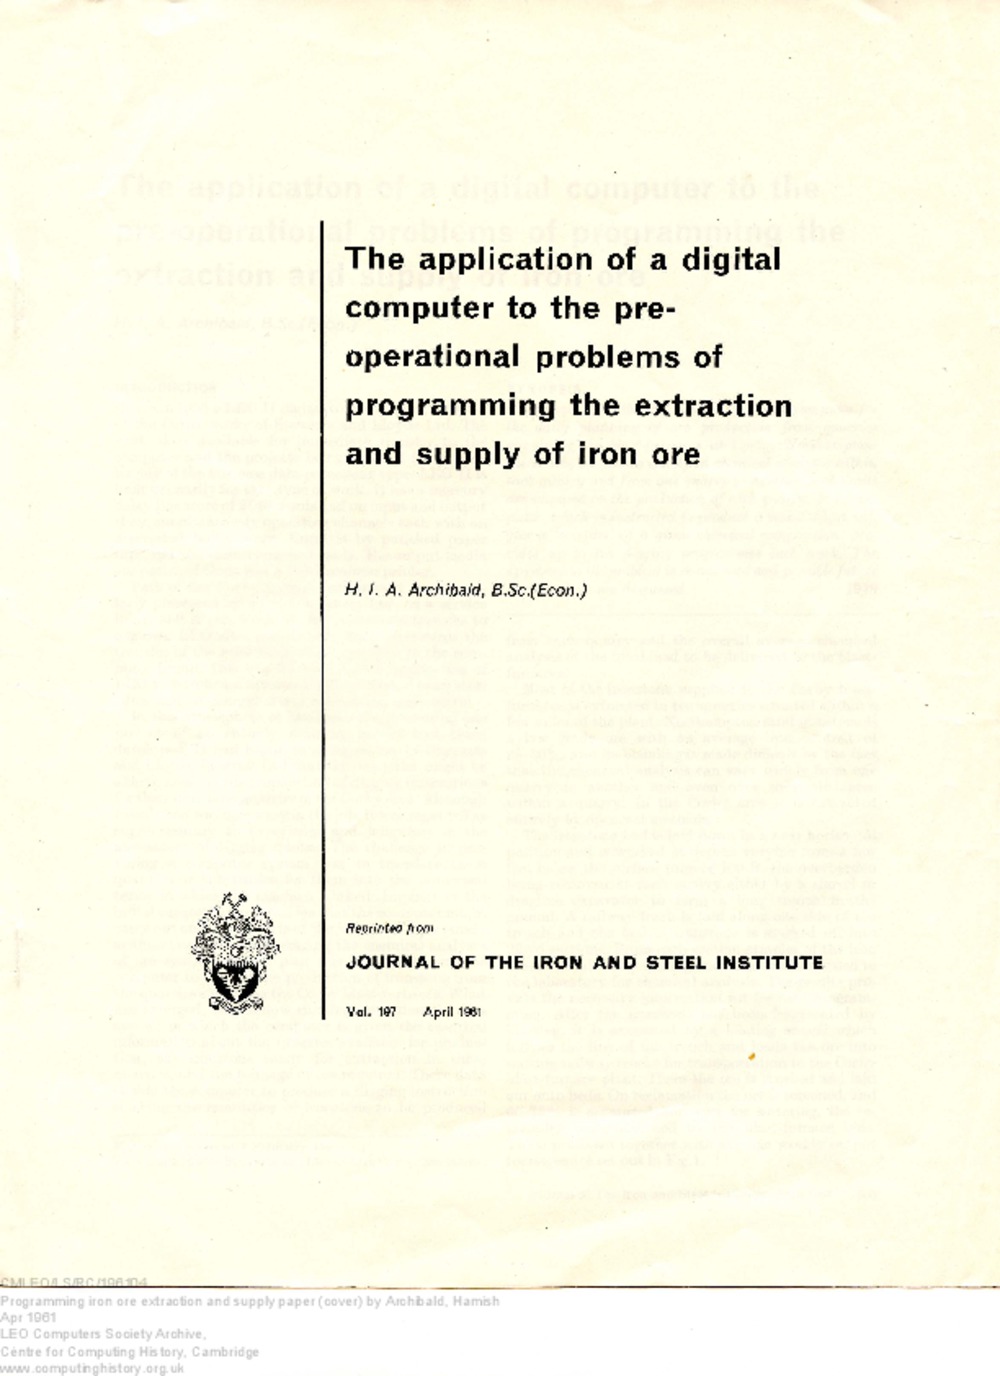 Article: 66104 The application of a digital computer to the pre-operational problems of programming the extraction and supply of iron ore